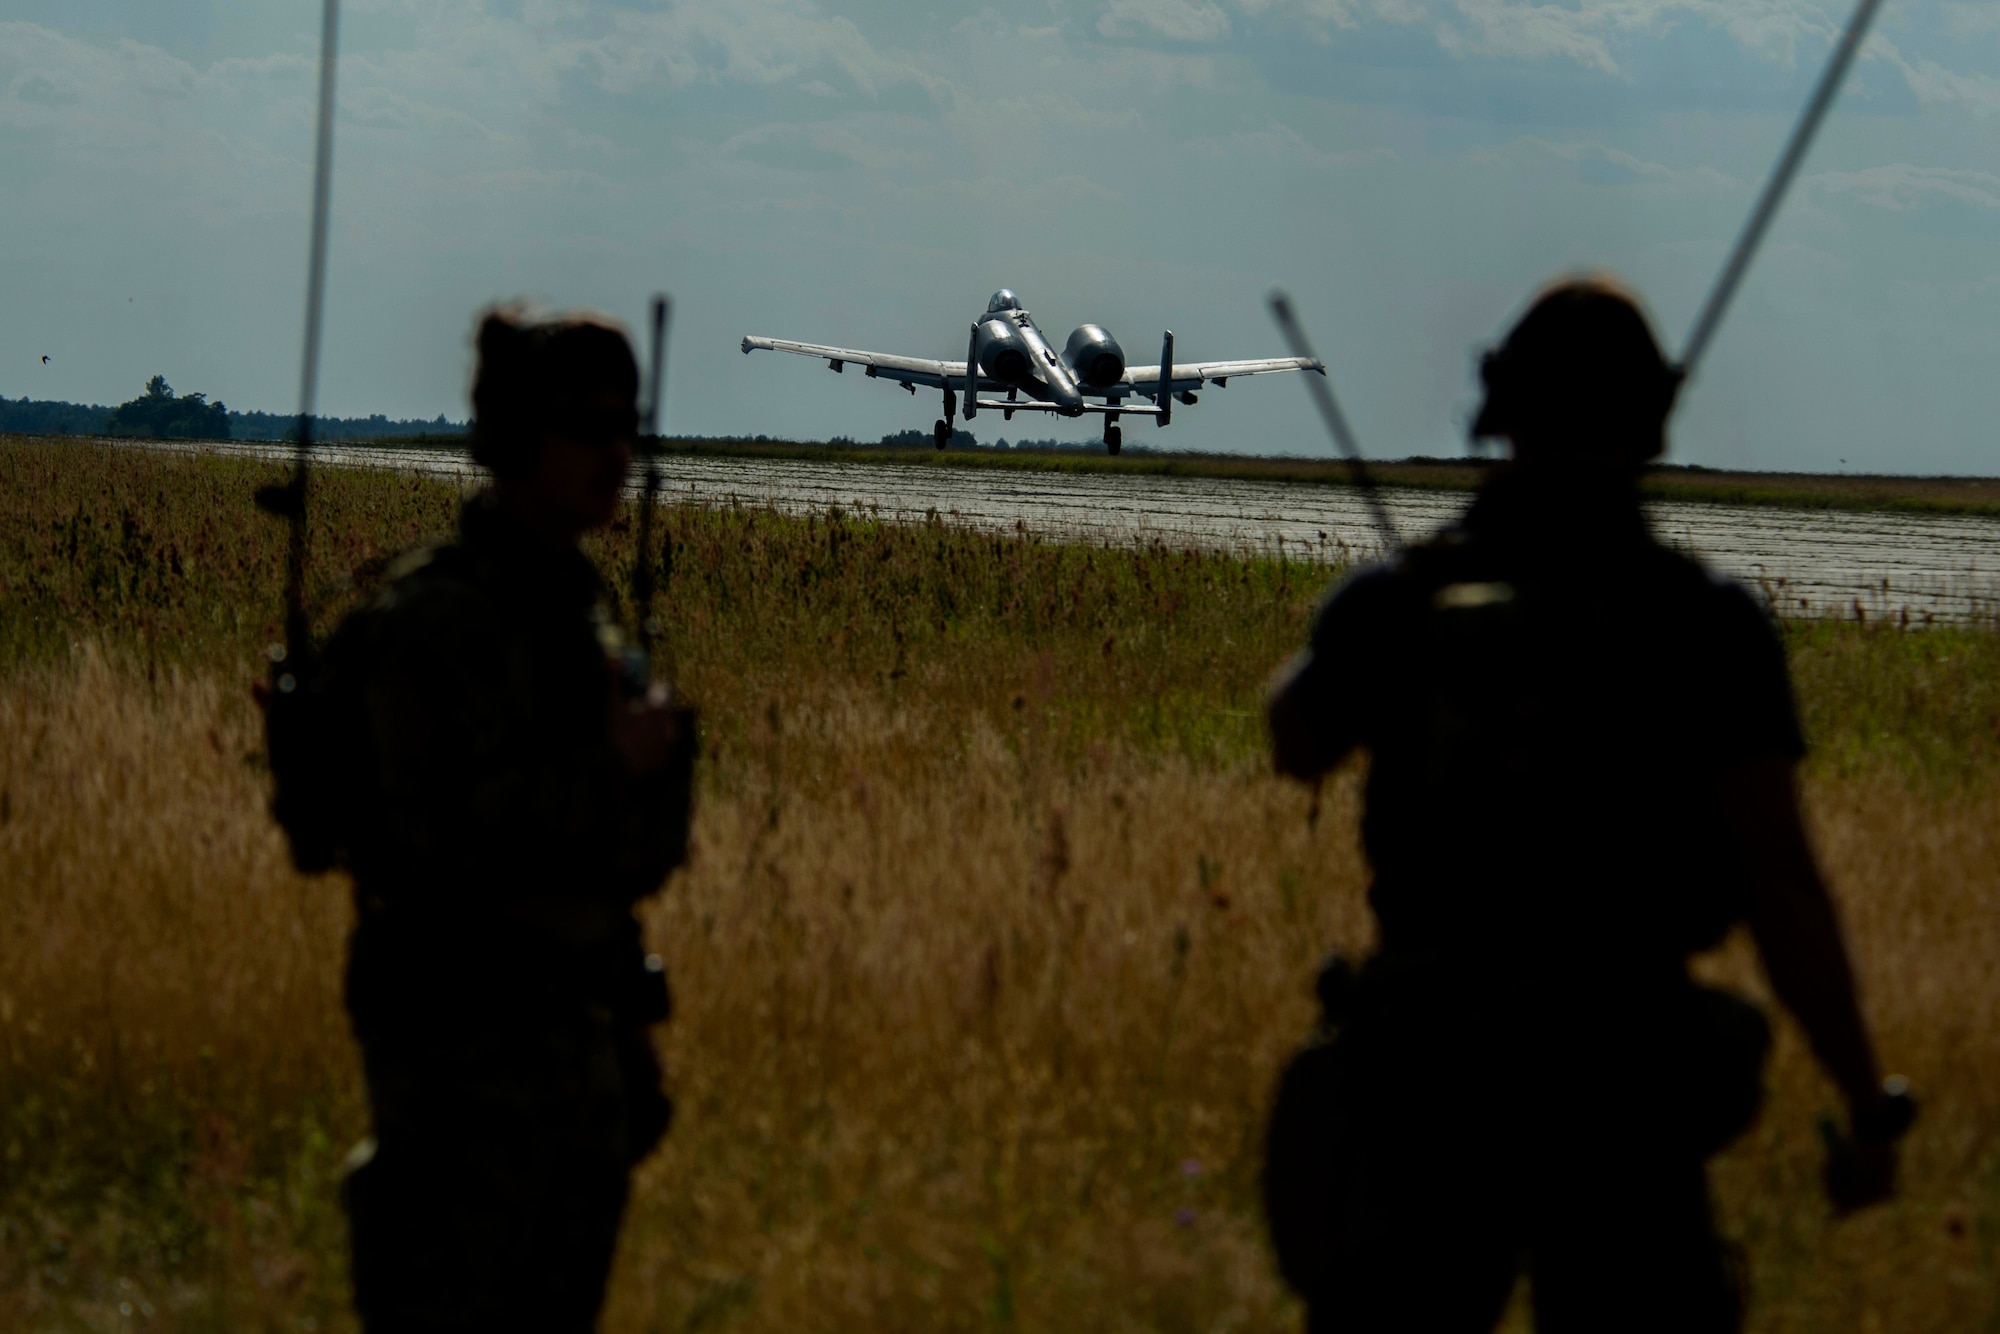 A 354th Expeditionary Fighter Squadron A-10C Thunderbolt II aircraft takes off in front of two 321st Special Tactics Squadron combat controllers during an austere landing training exercise at Nowe Miasto, Poland, July 20, 2015. The 321st STS combat controllers conducted ground air traffic control for the A-10 pilots during the exercise. (U.S. Air Force photo by Airman 1st Class Luke Kitterman/Released)